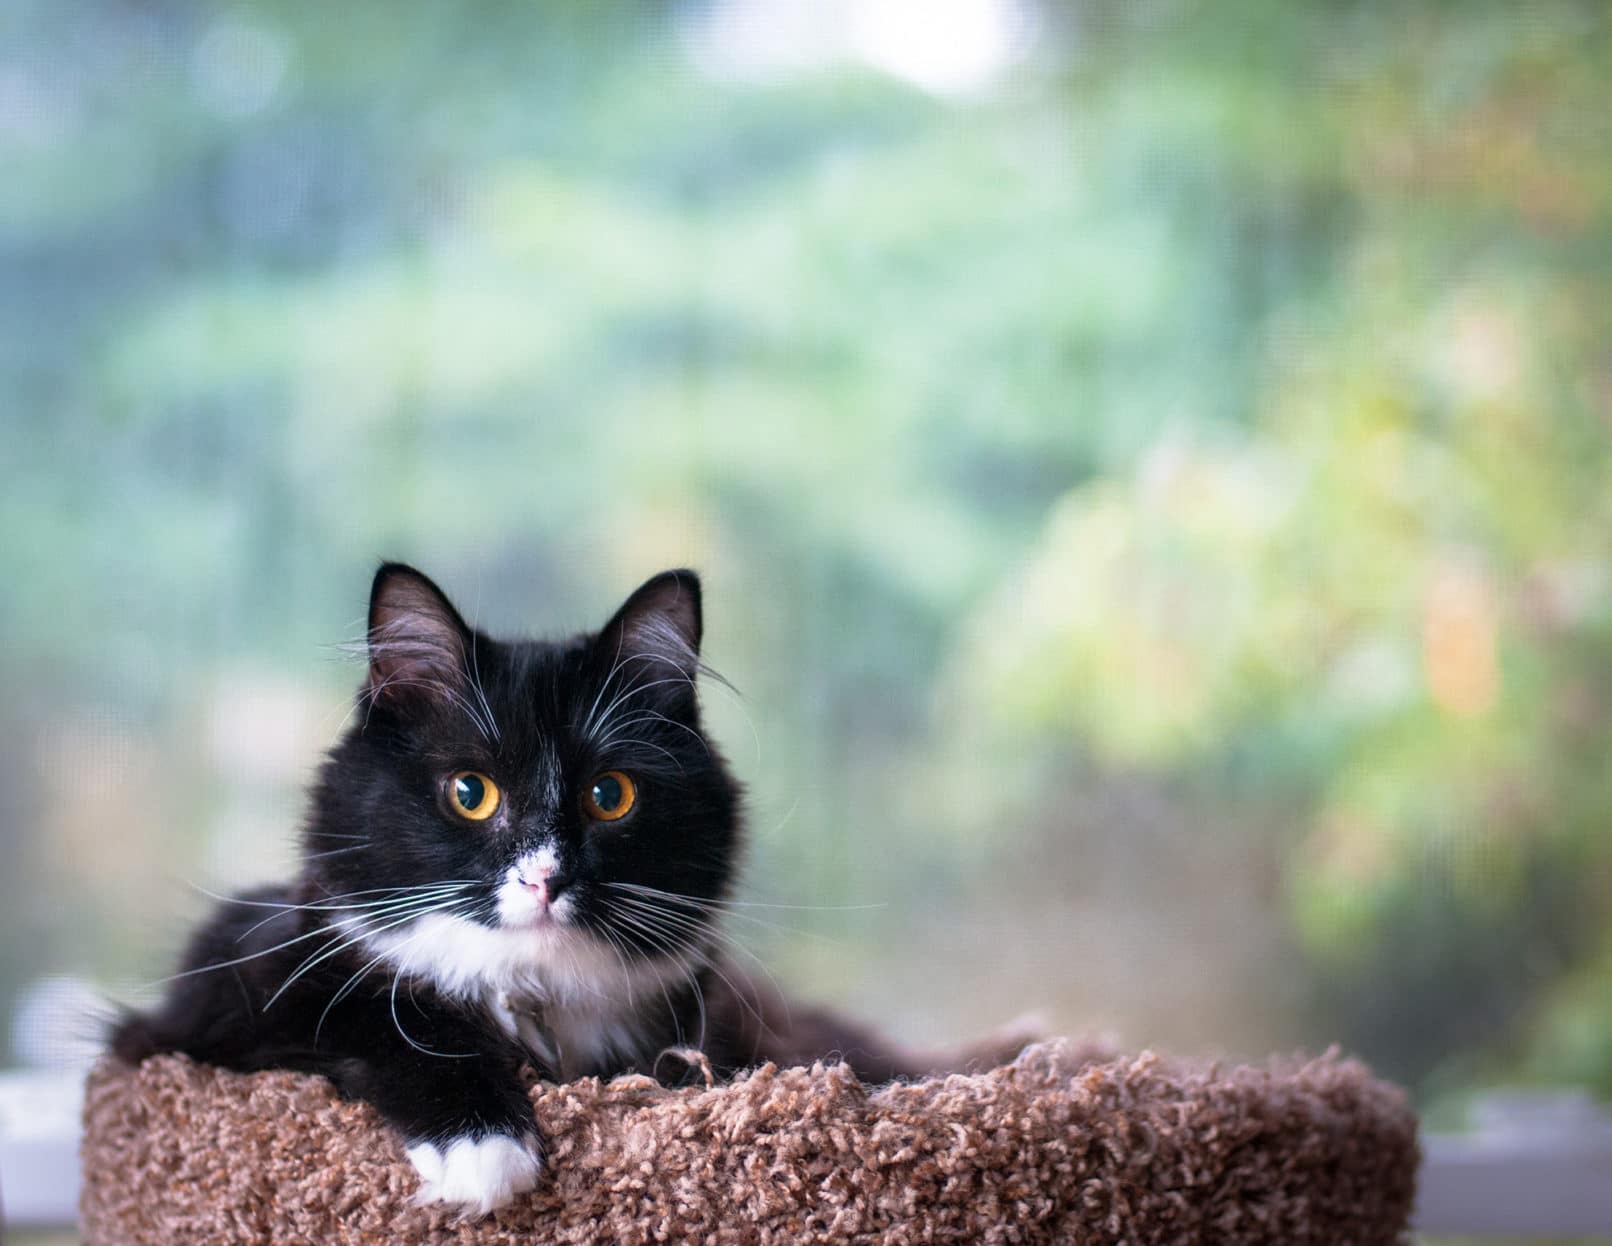 black and white cat in a brown cat tower looking at camera with a blurred background